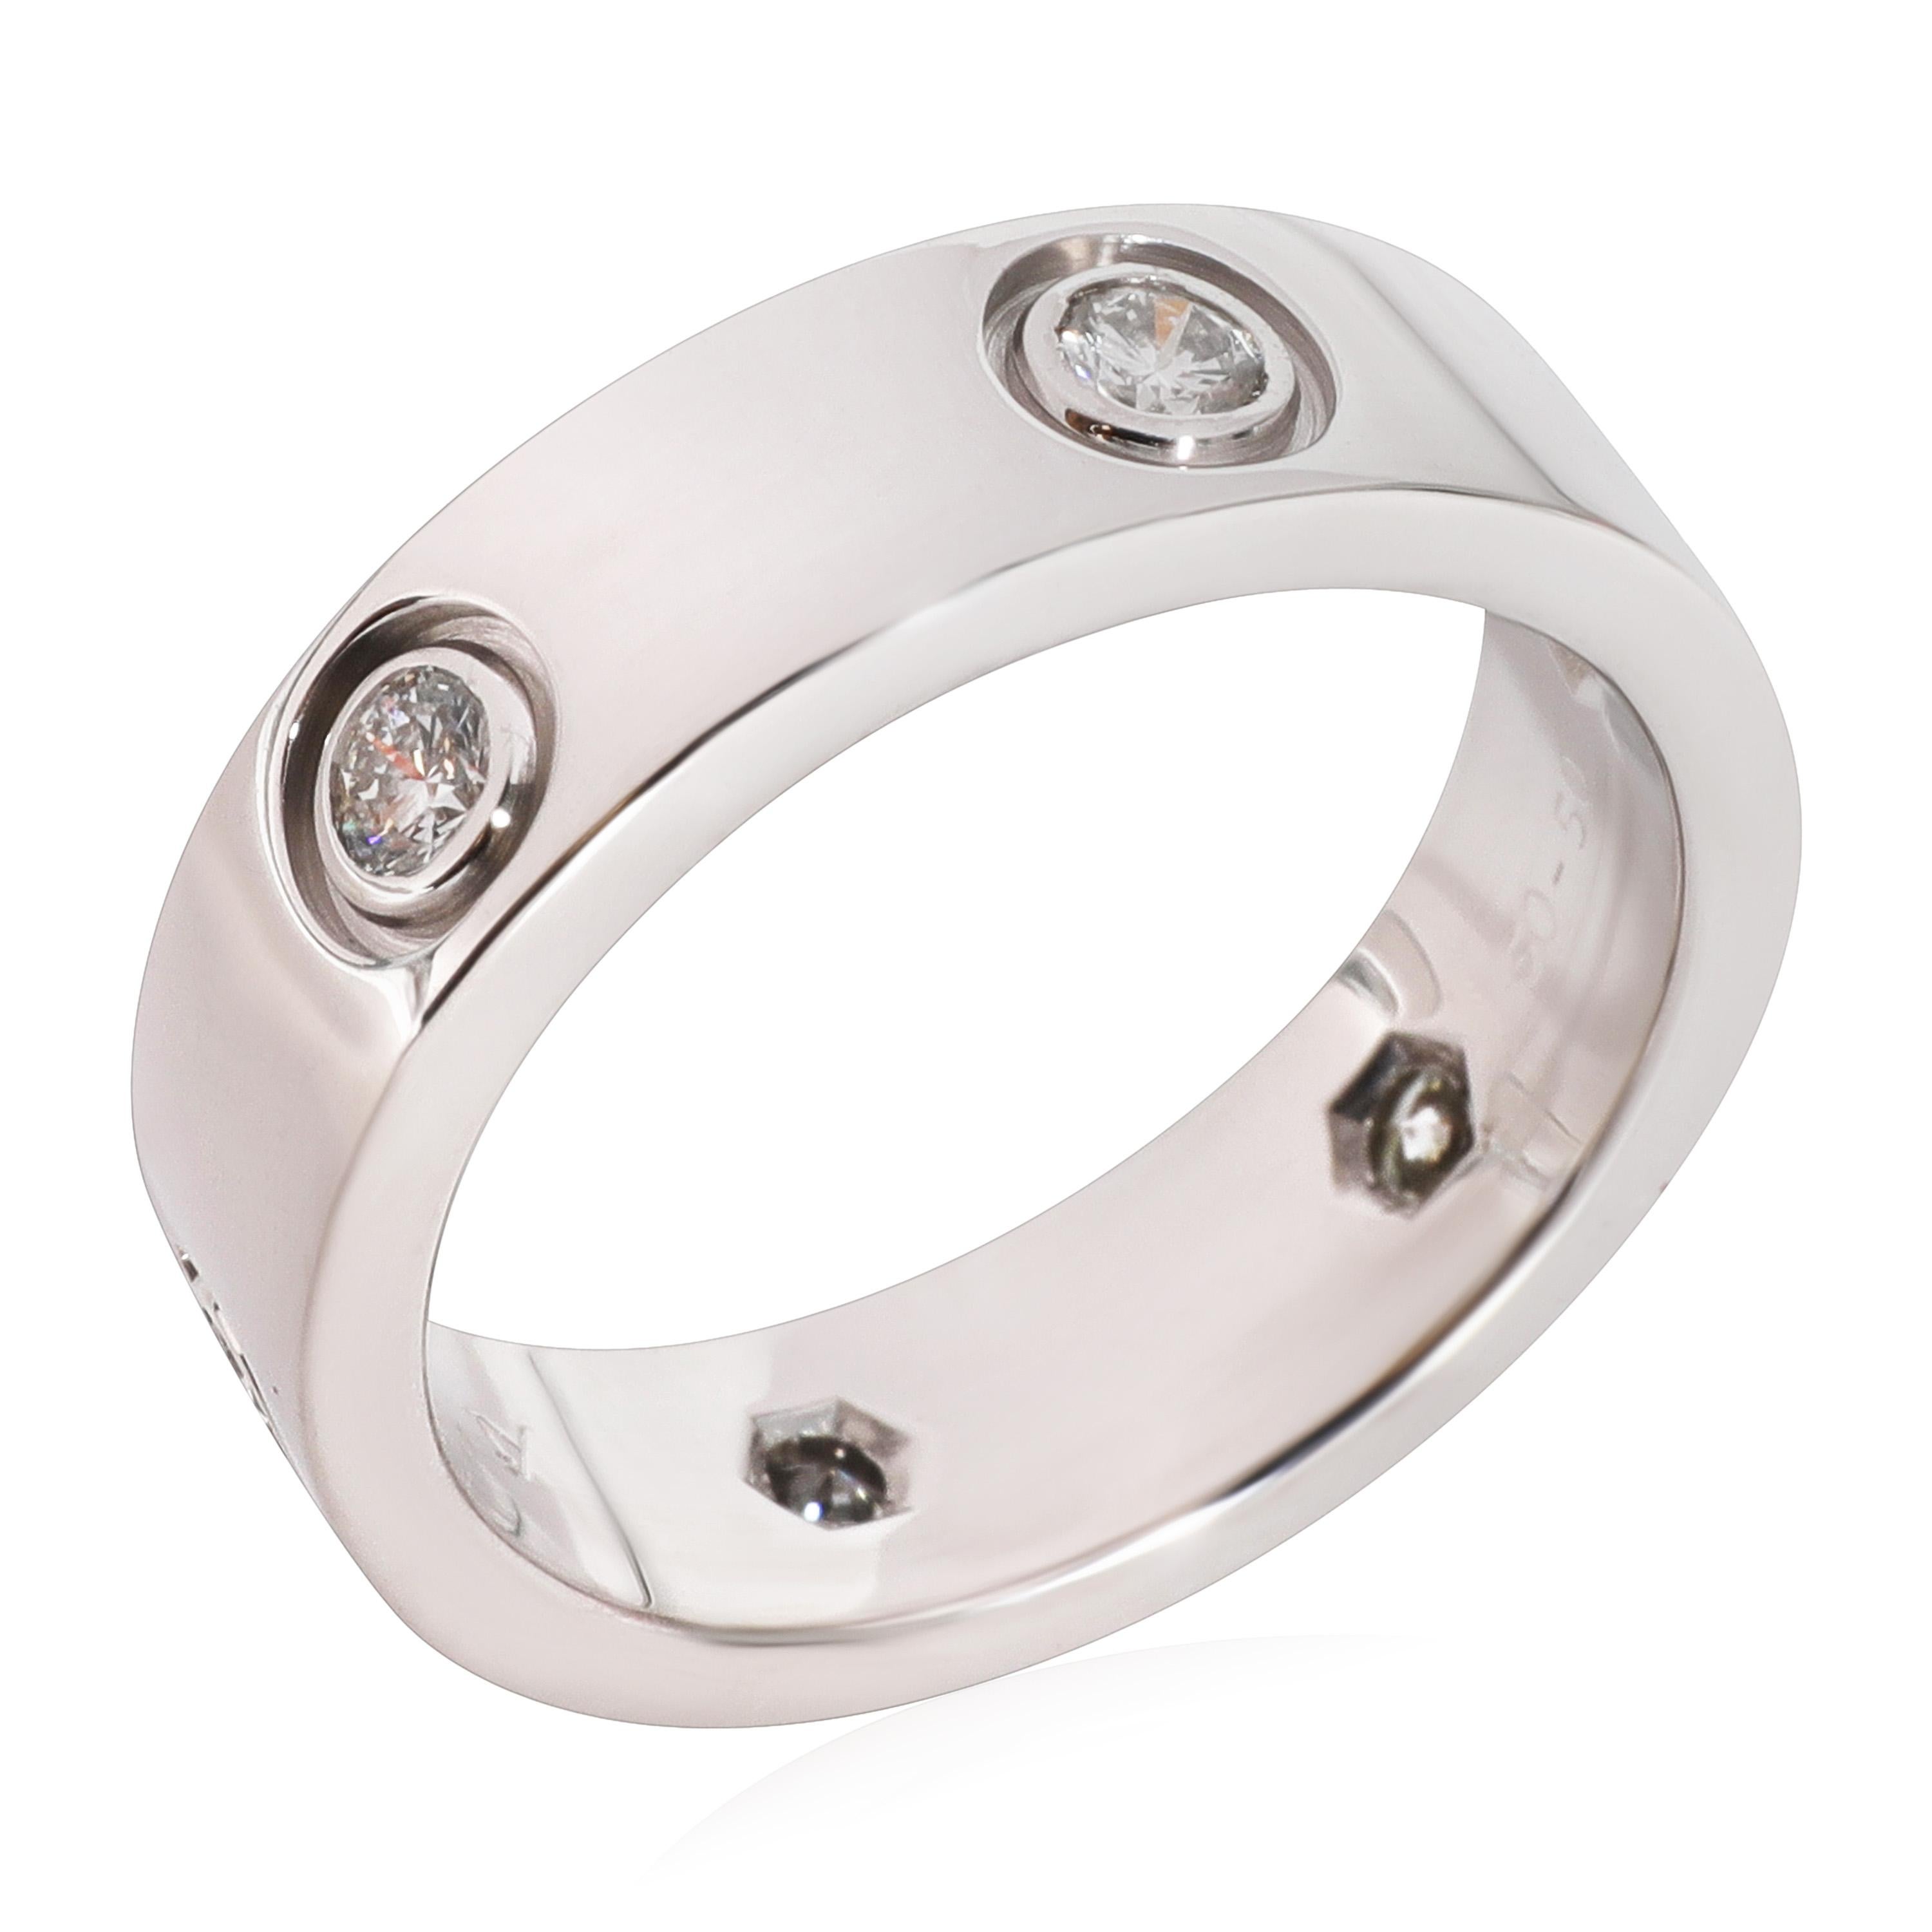 Cartier Love Diamond Ring in 18k White Gold 0.46 CTW

PRIMARY DETAILS
SKU: 122346
Listing Title: Cartier Love Diamond Ring in 18k White Gold 0.46 CTW
Condition Description: Retails for 6000 USD. In excellent condition and recently polished. Ring